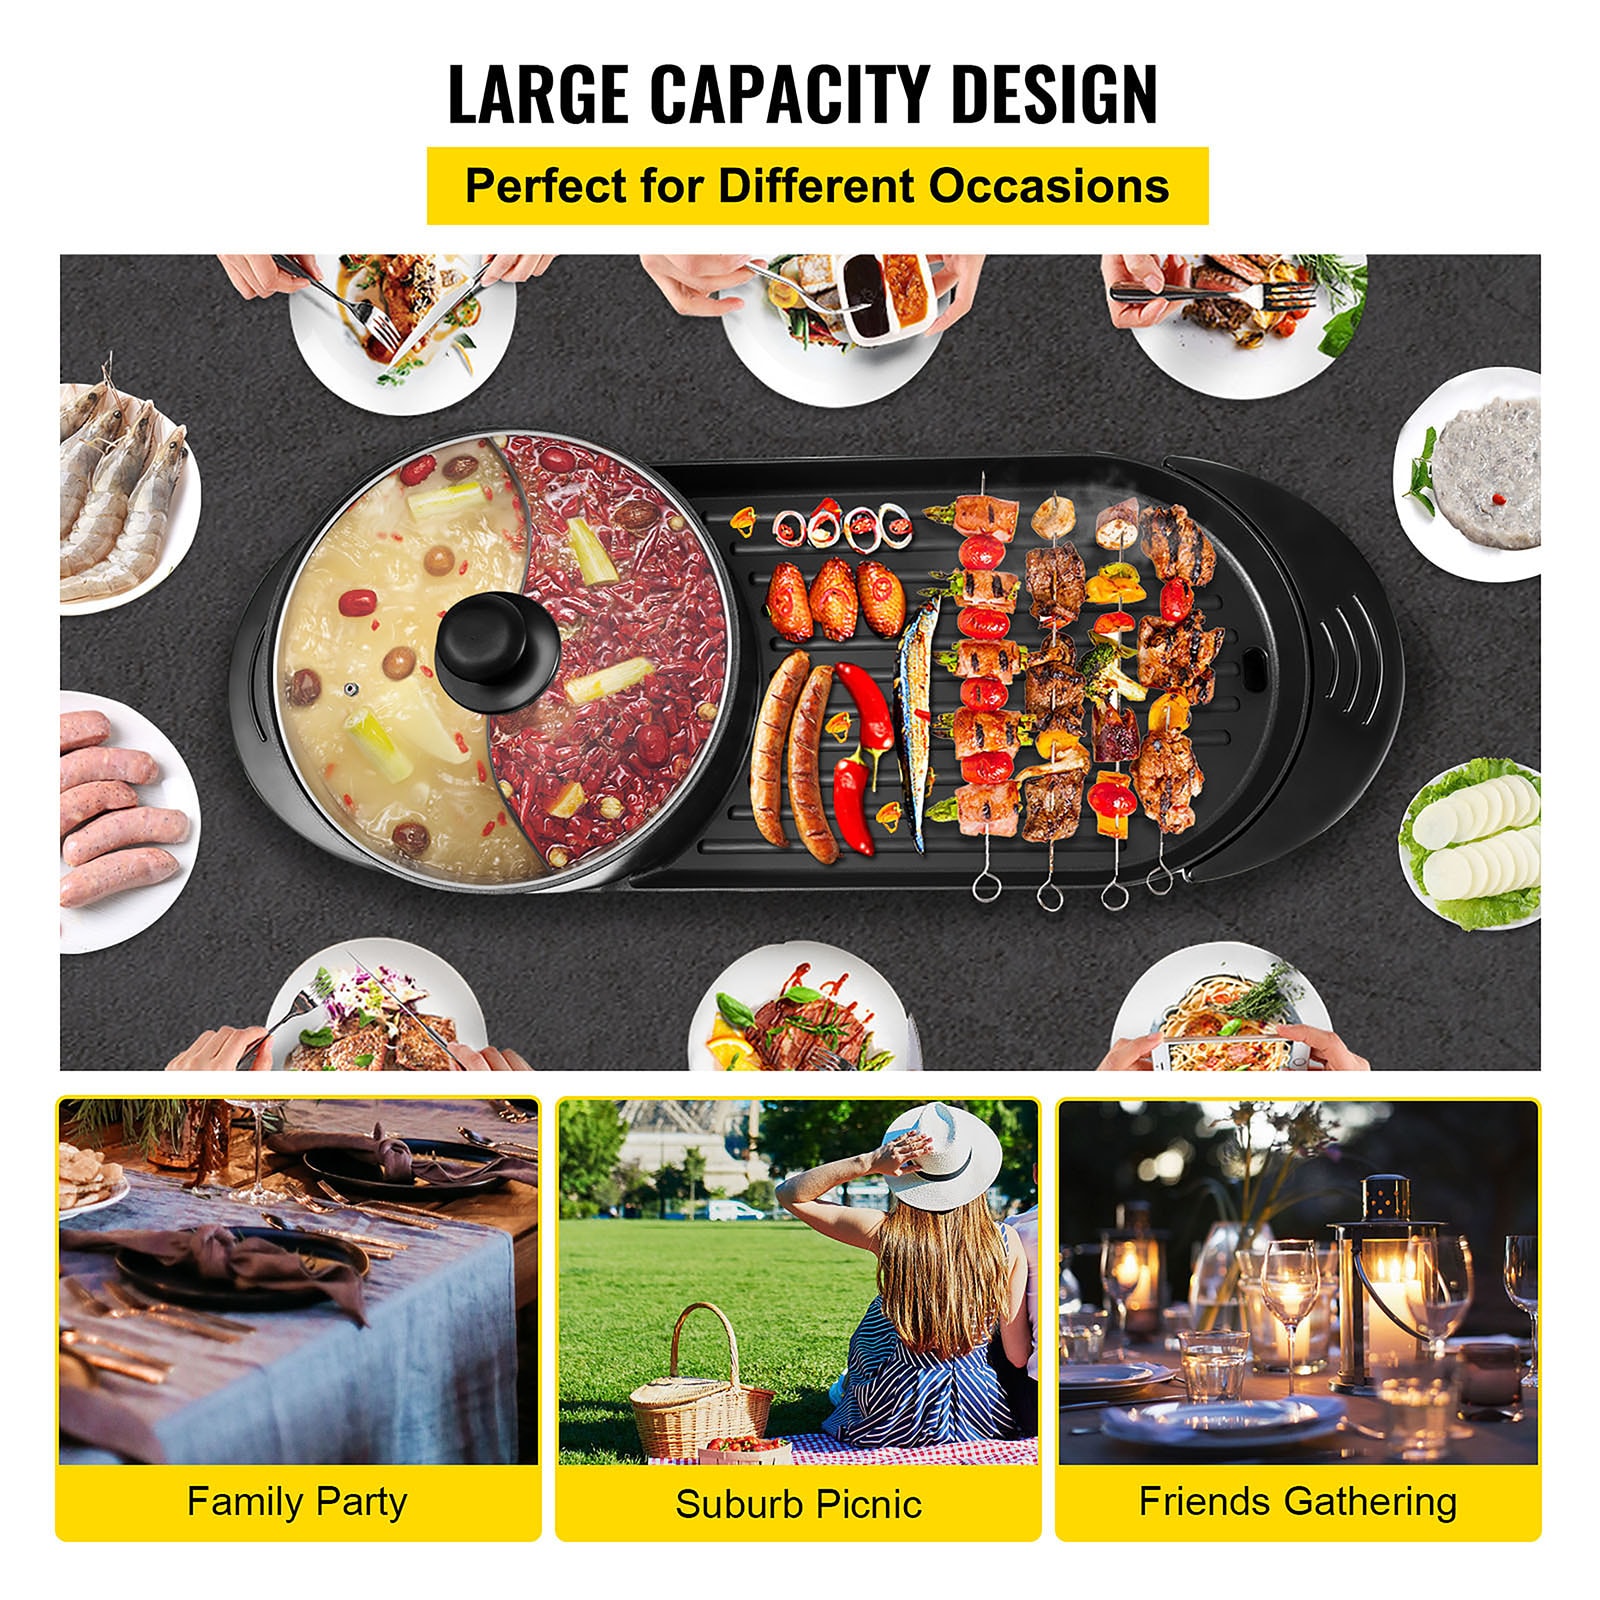 VEVORbrand 2 in 1 Electric Hot Pot and Grill, 2200W BBQ Pan Grill and Hot  Pot, Multifunctional Teppanyaki Grill Pot with Dual Temp Control, Smokeless